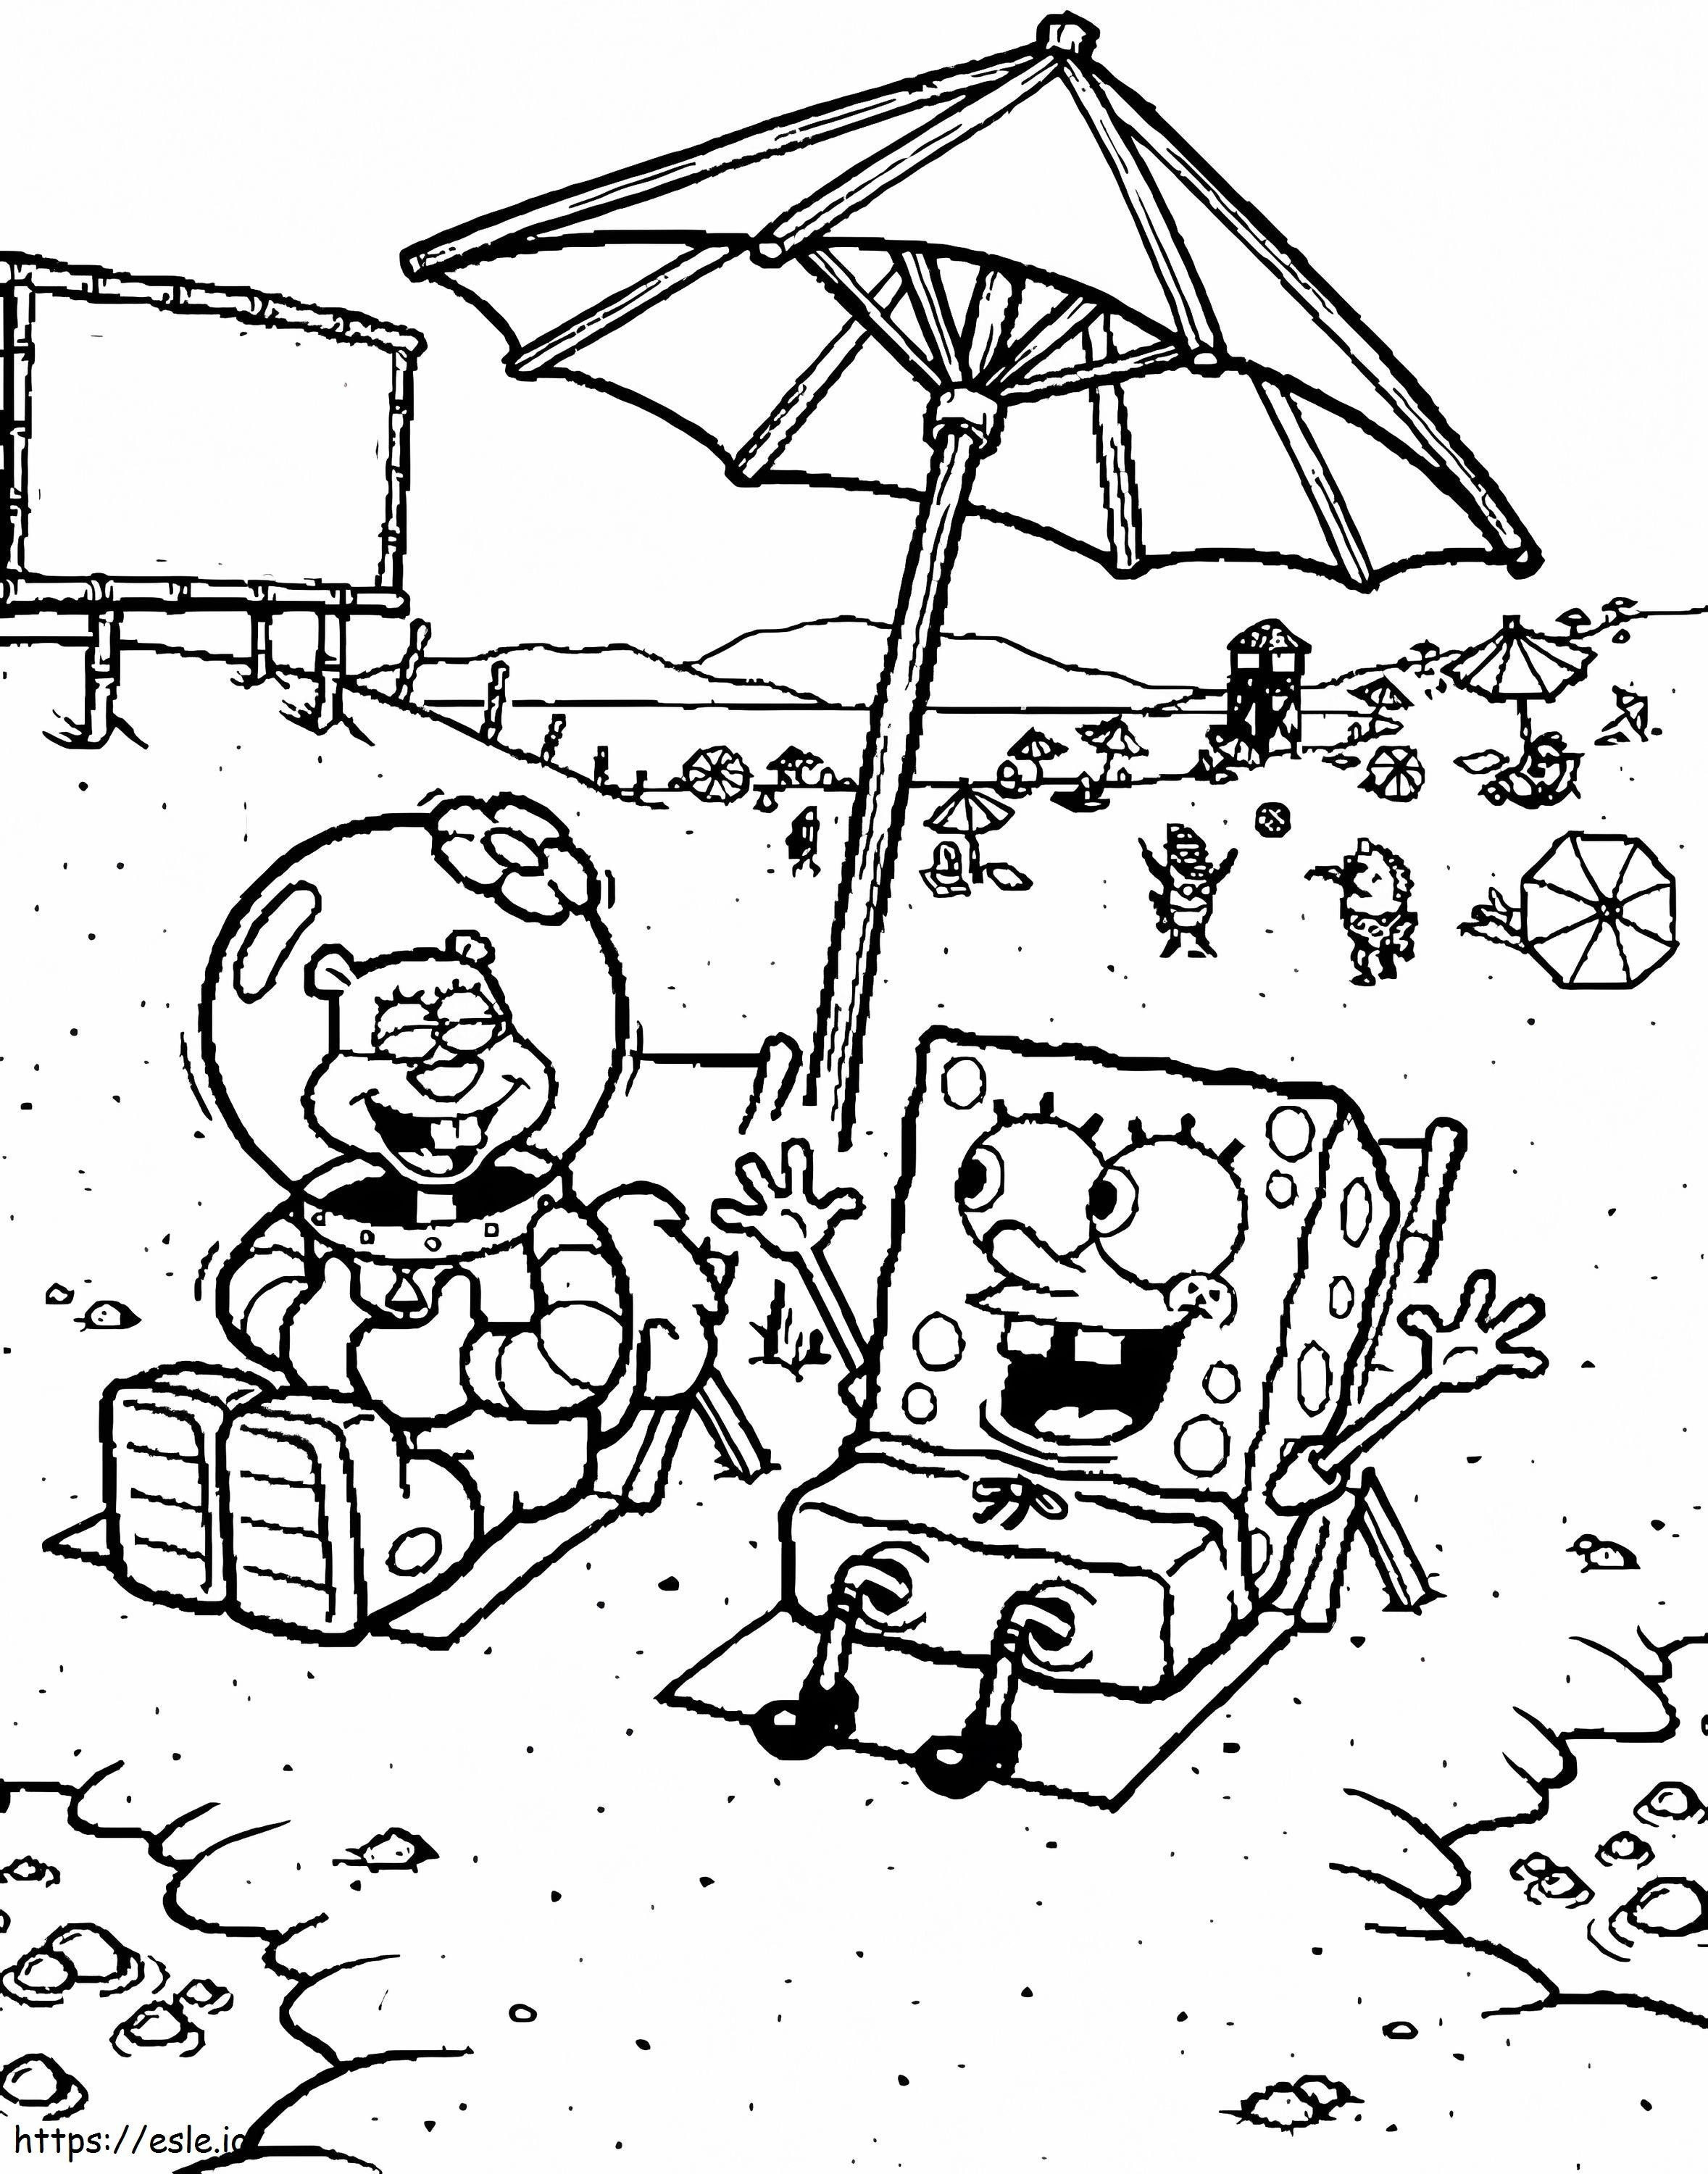 Spongebob With Sandy Cheeks coloring page